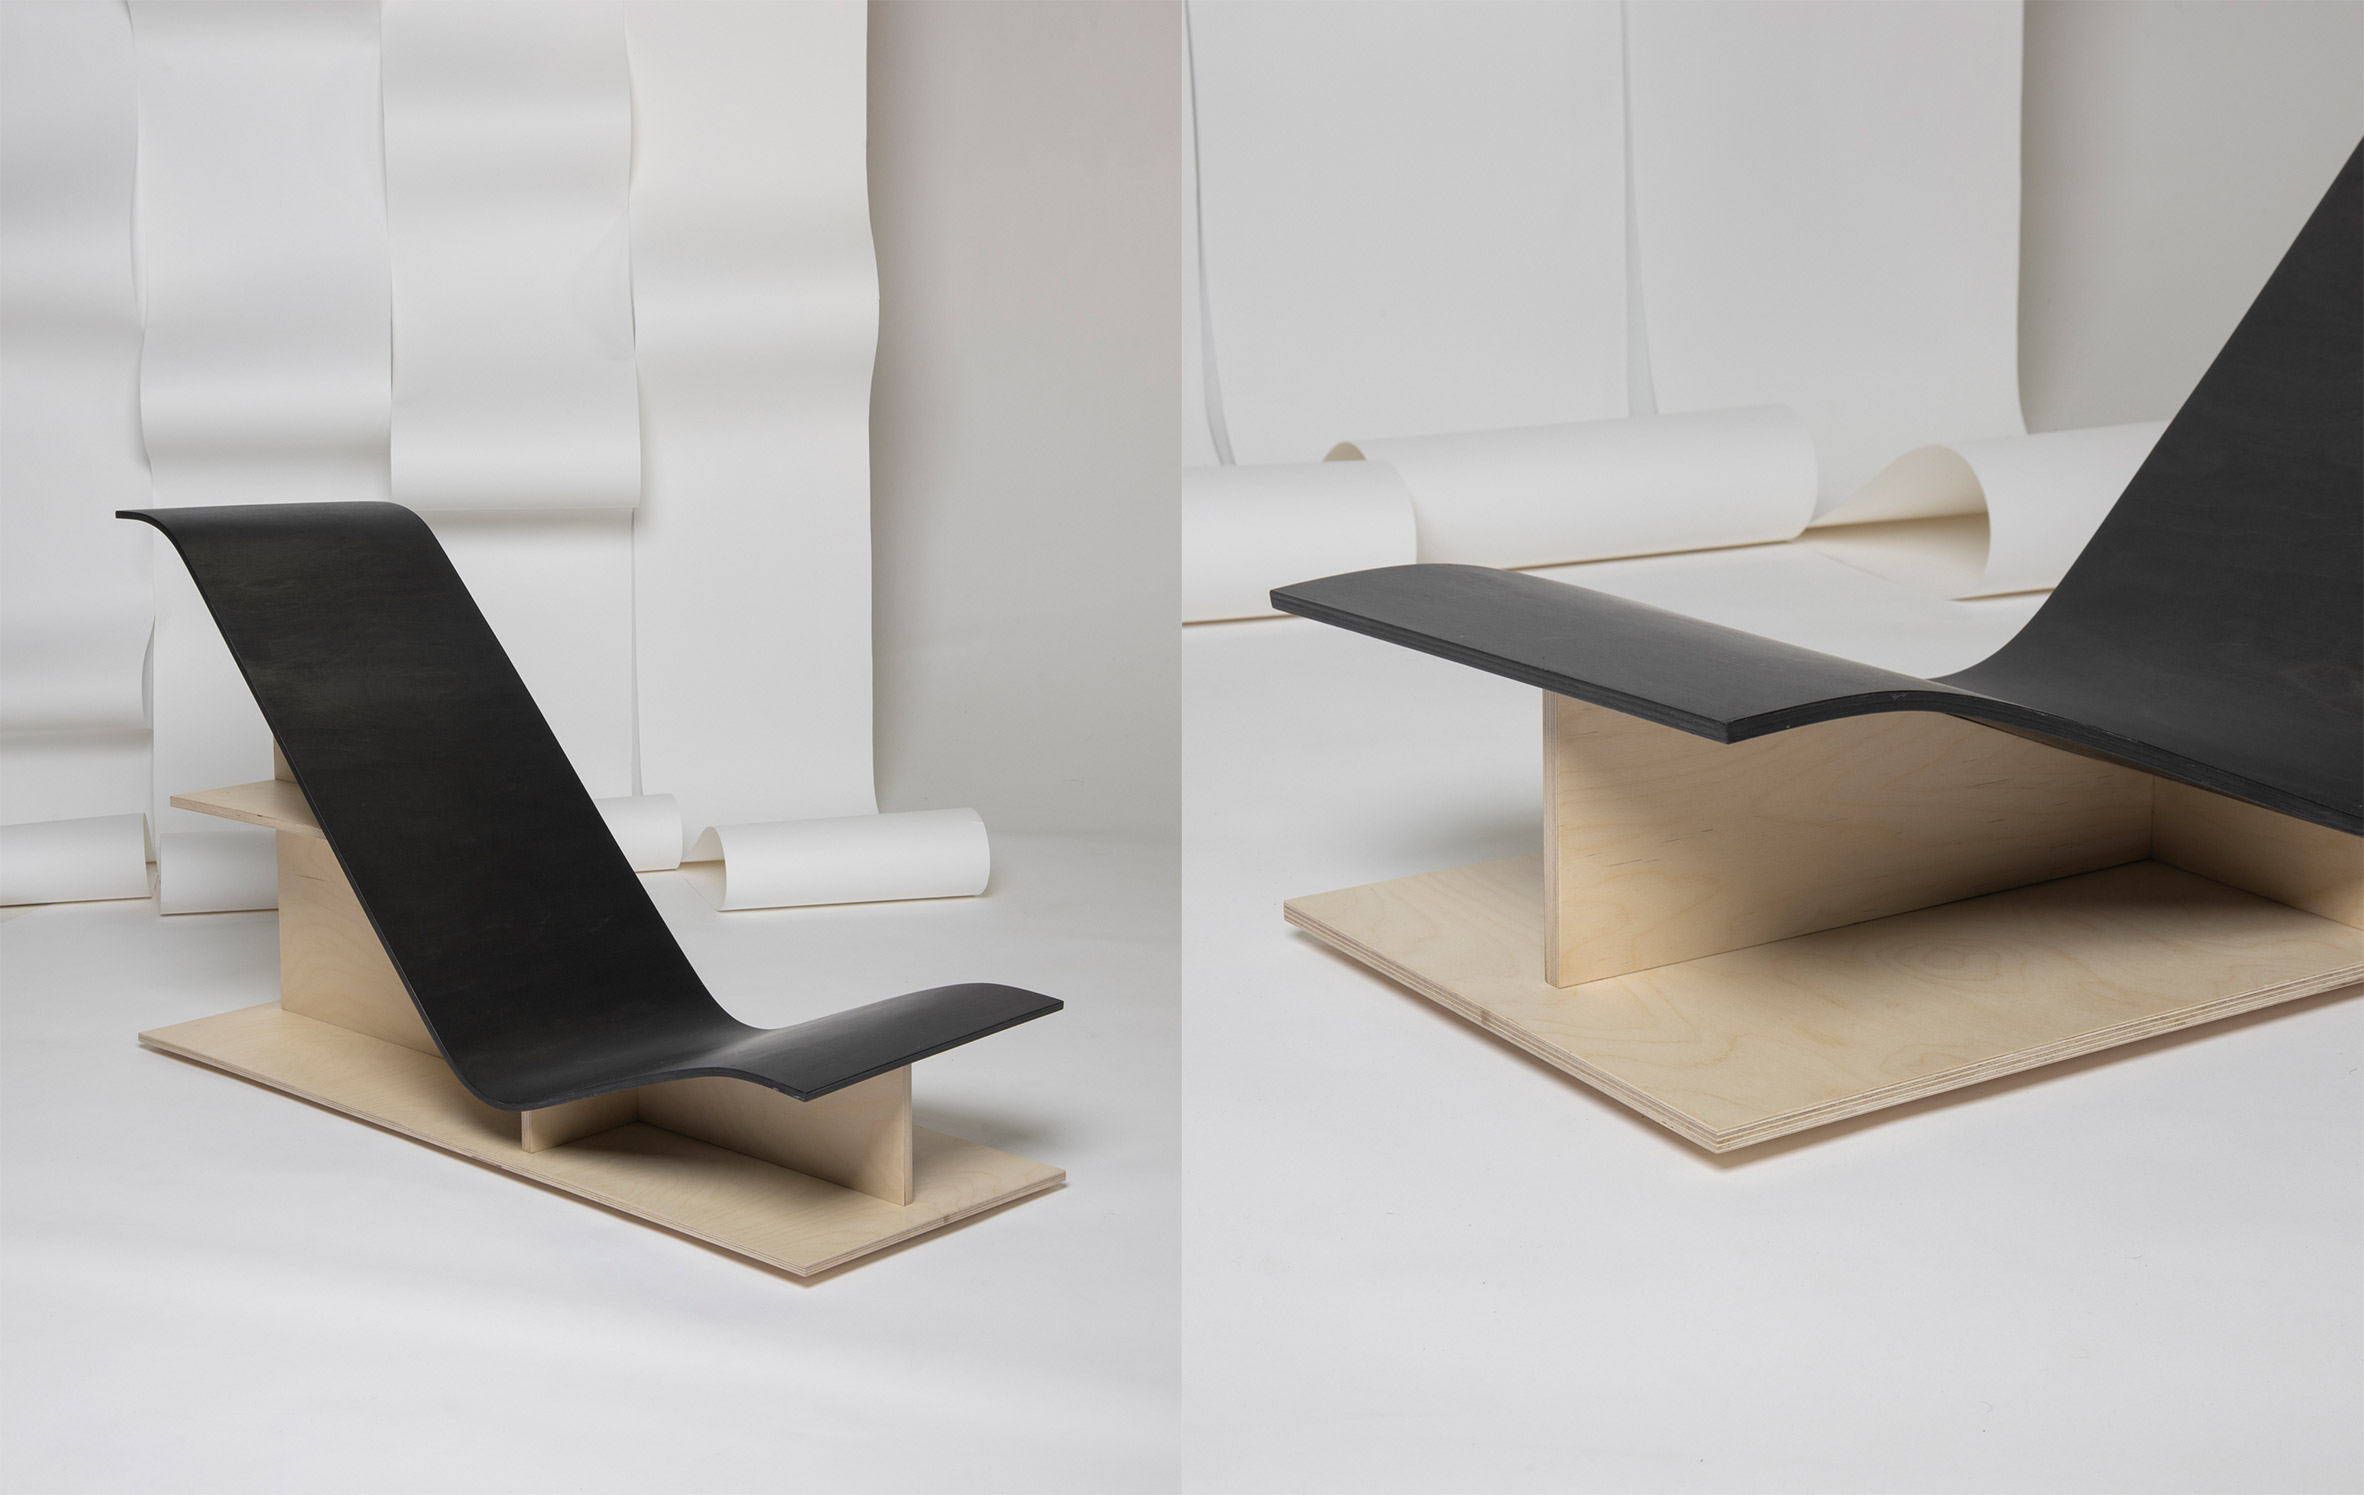 A black long chair designed for reading